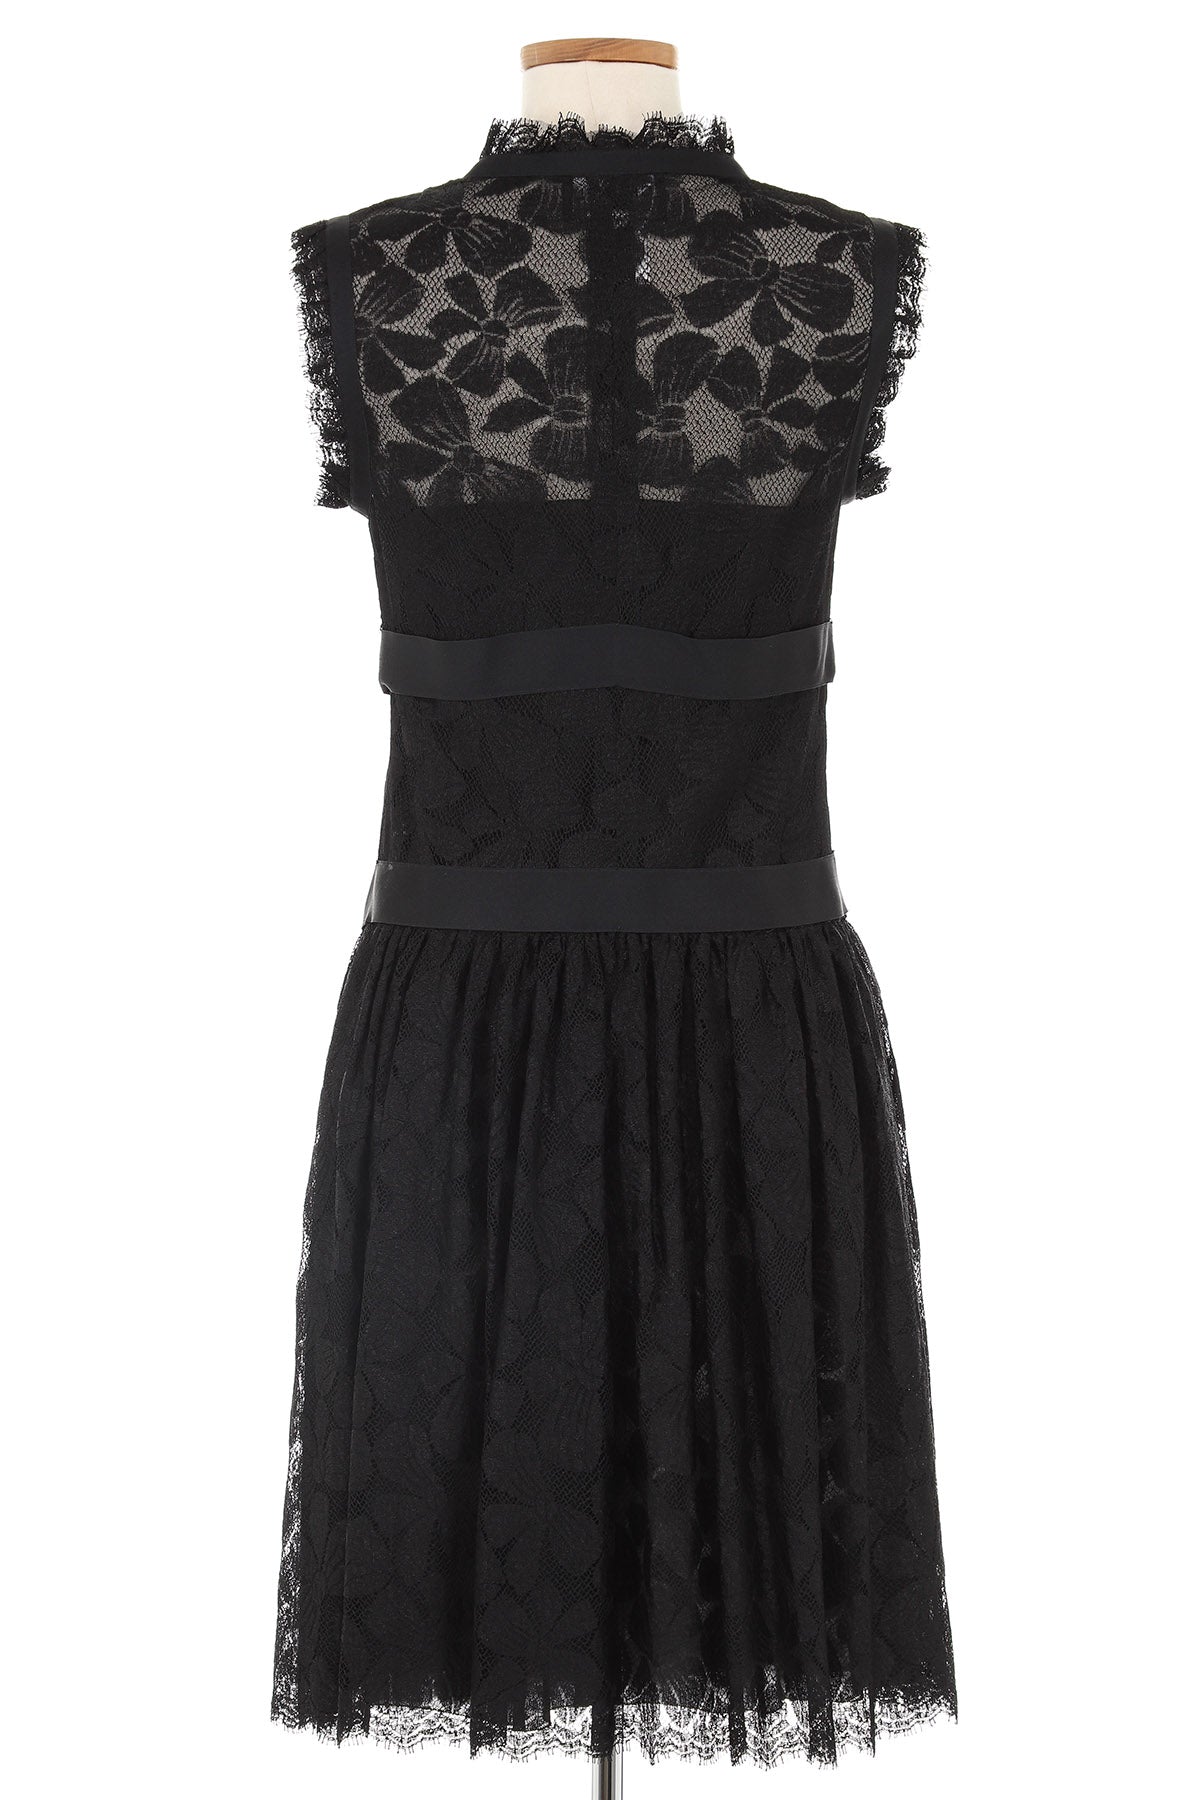 Fall From Lace - Black Lace Top – DLSB